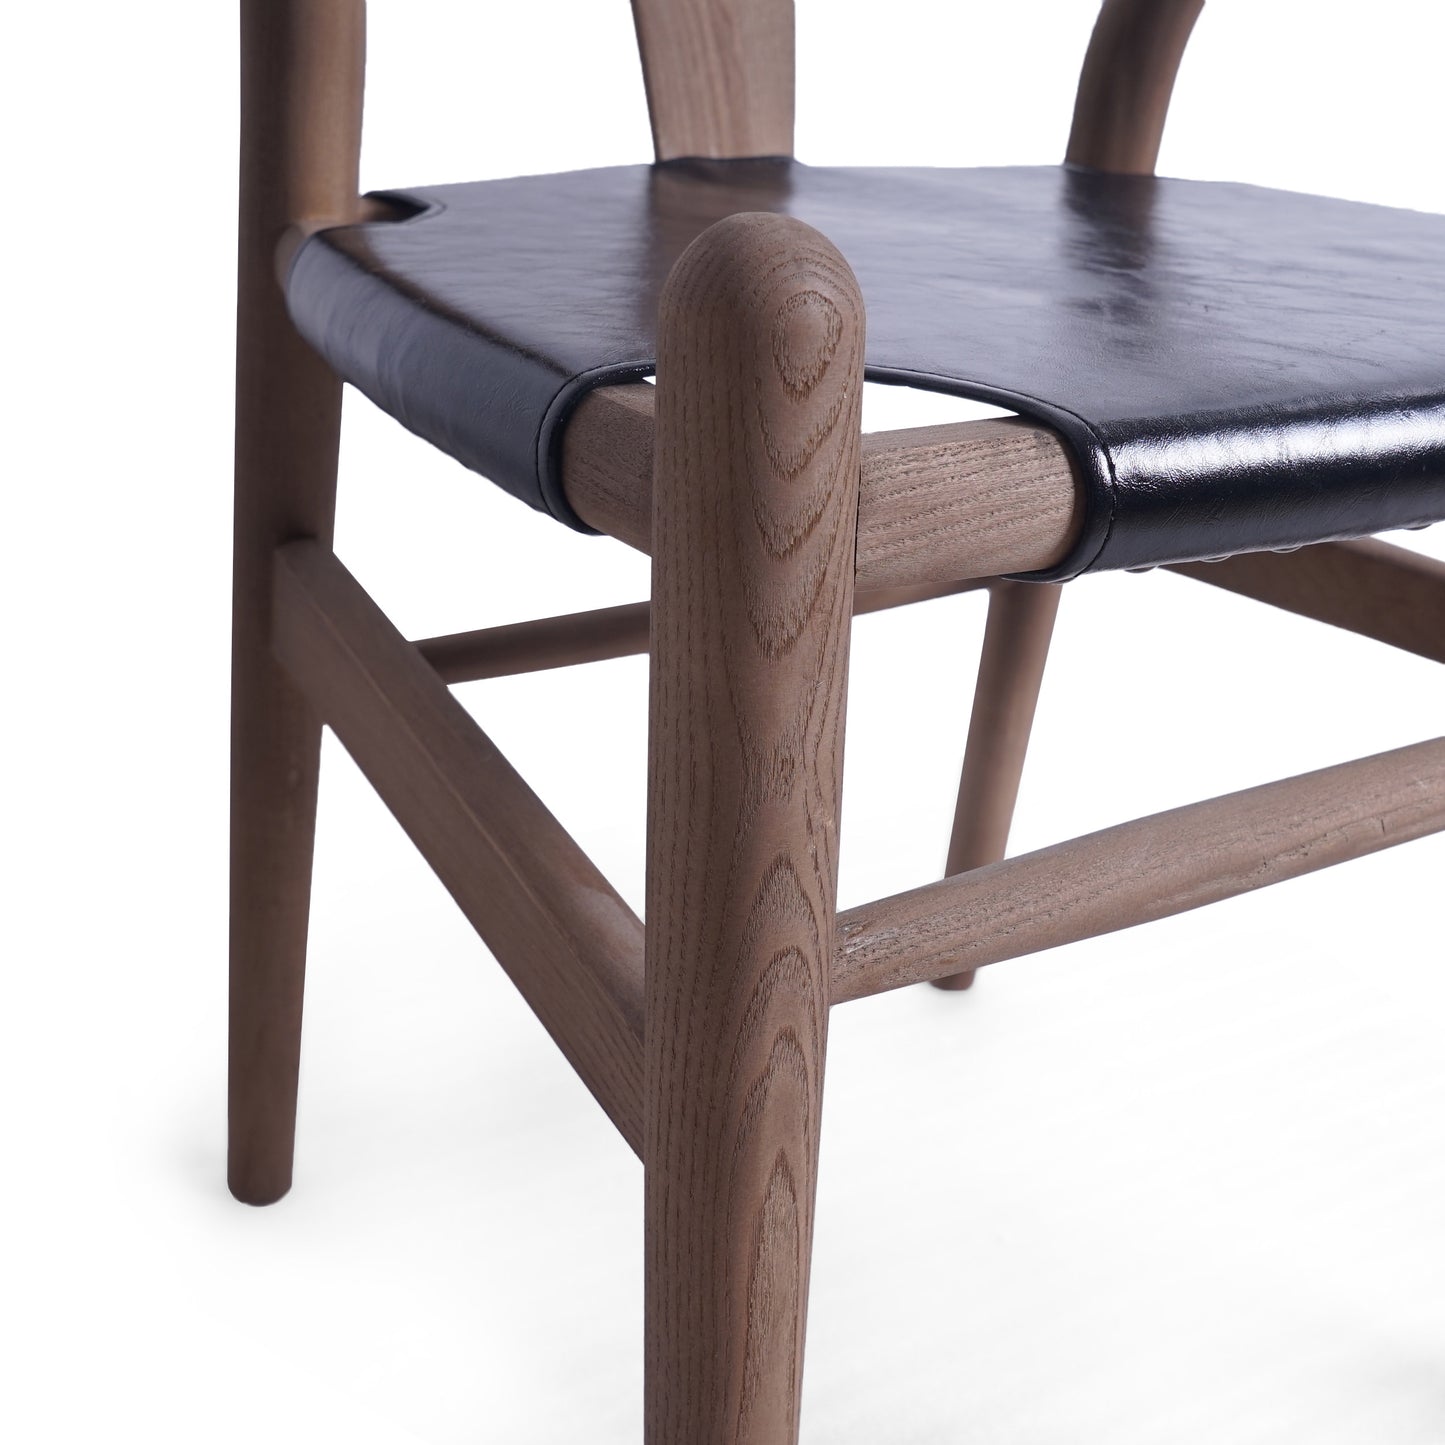 Quince Rustic Faux Leather and Elm Wood Wishbone Chair